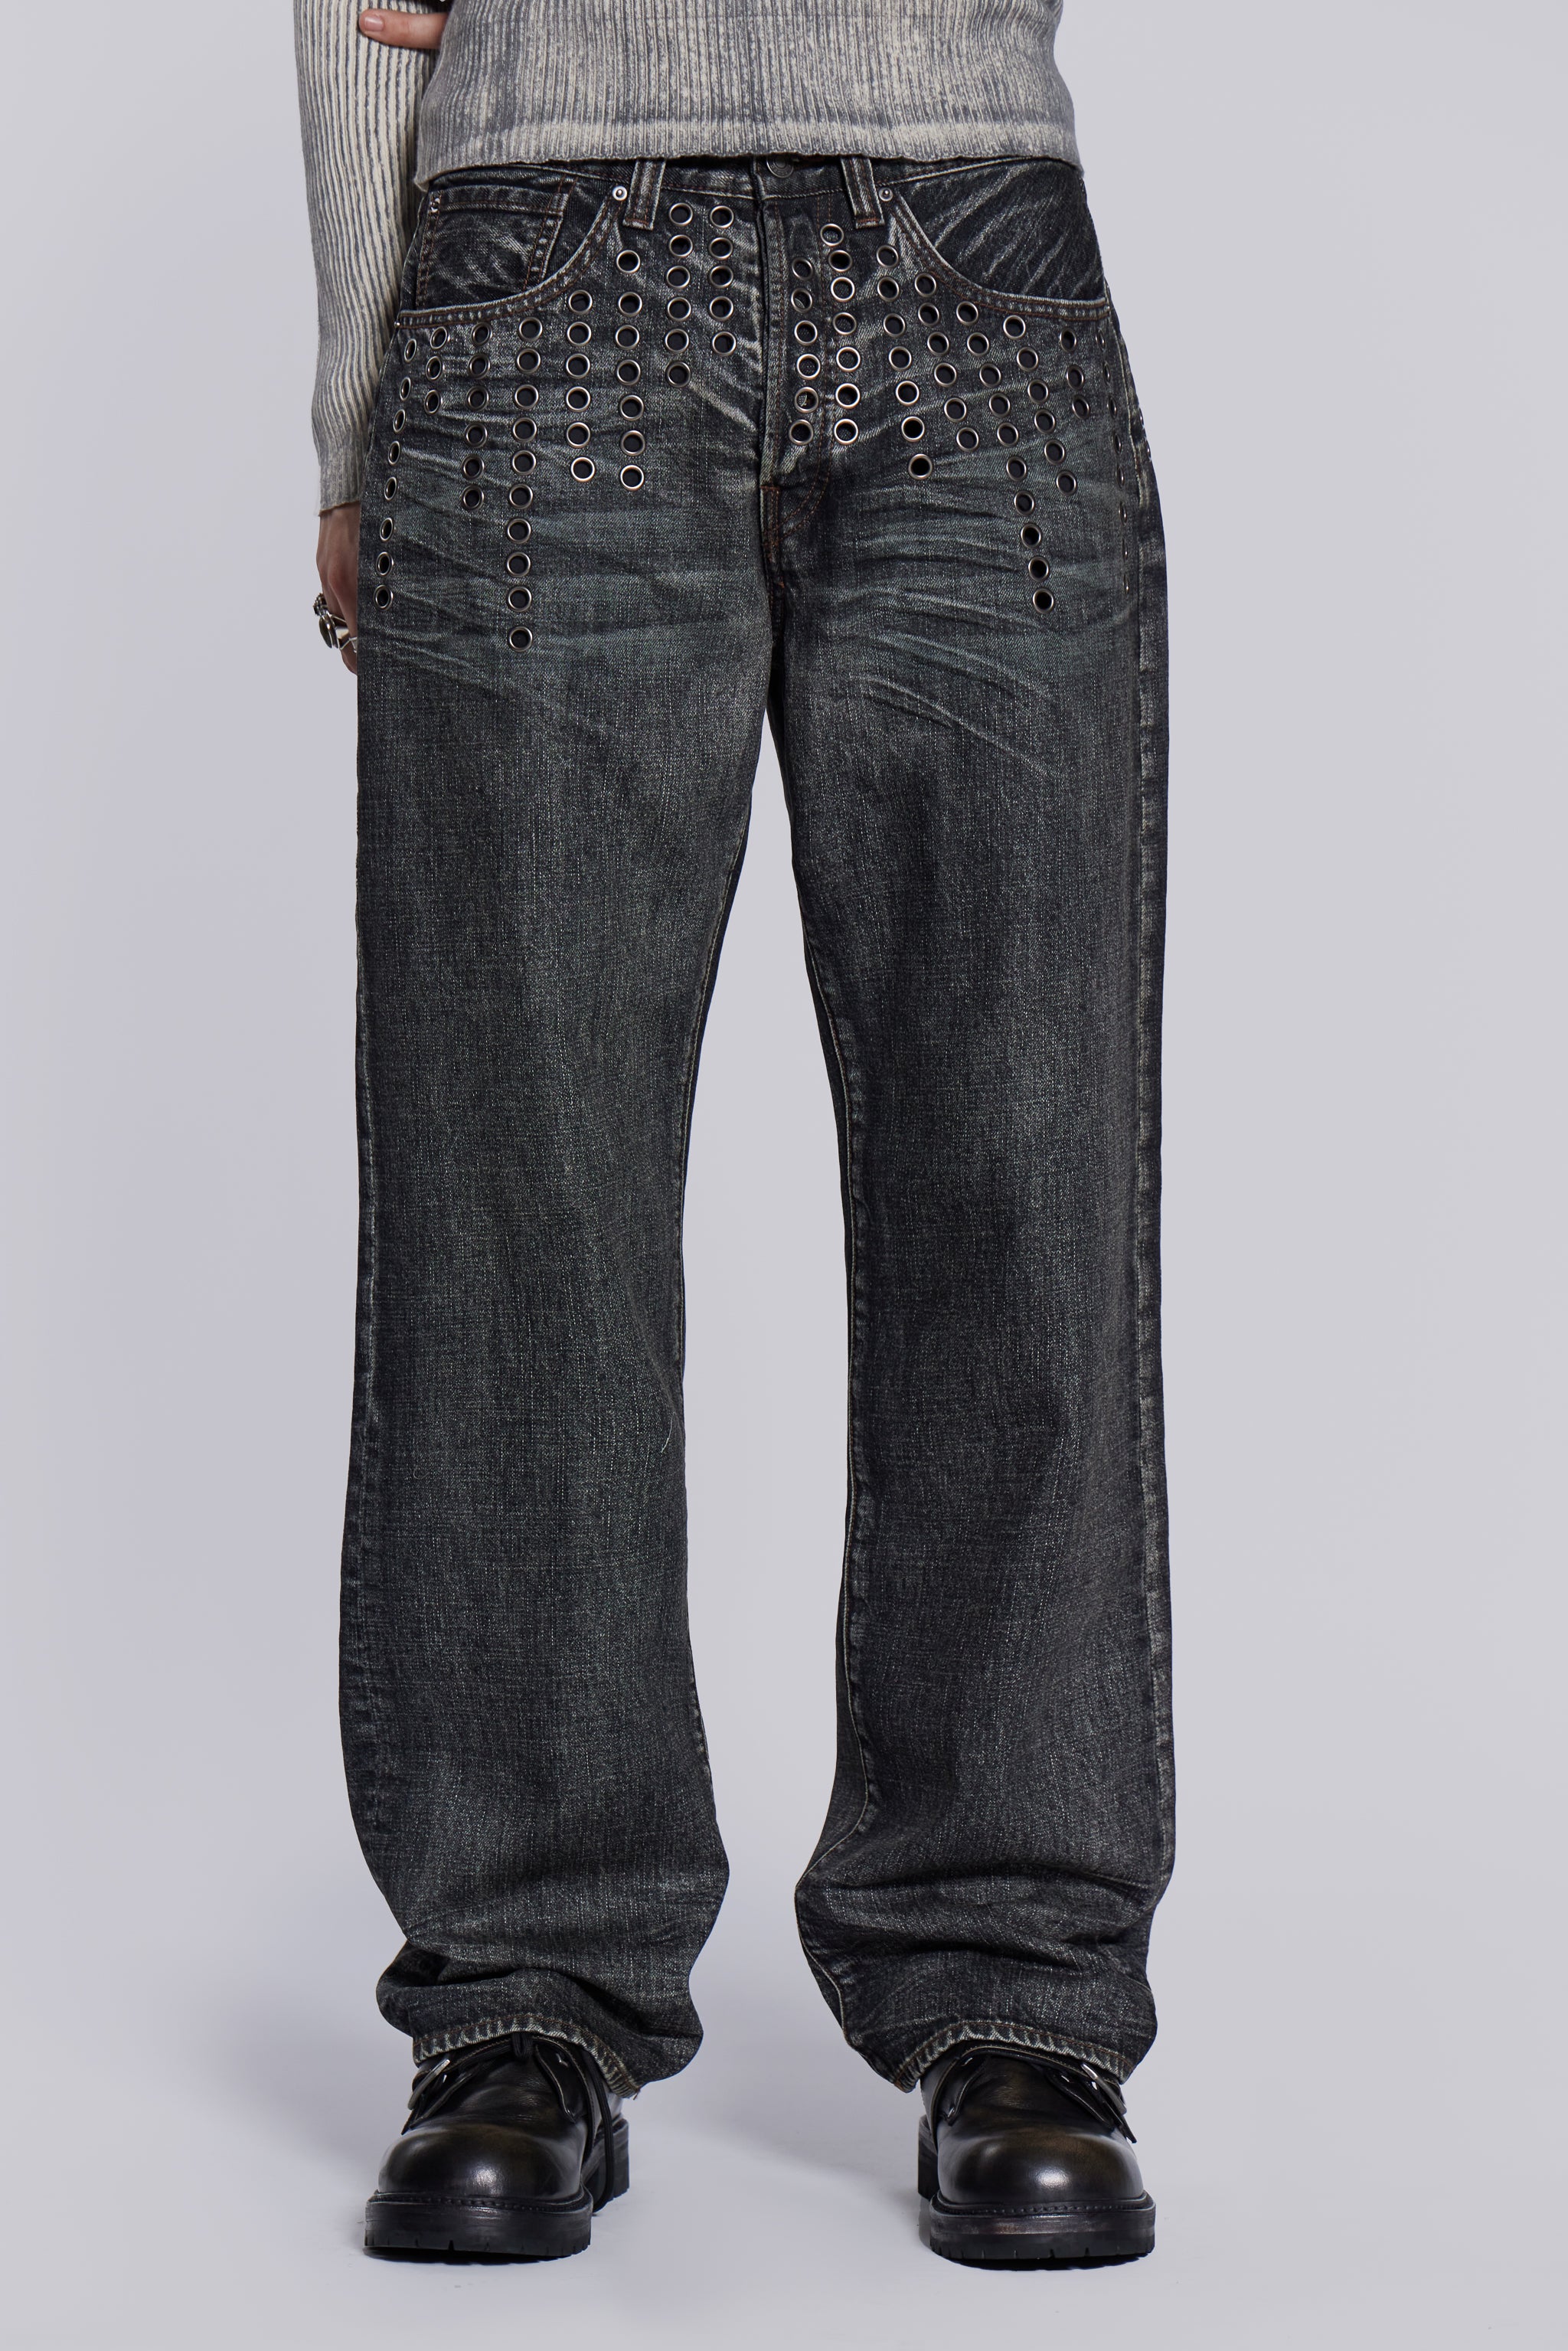 Jaded London Puncture Jeans